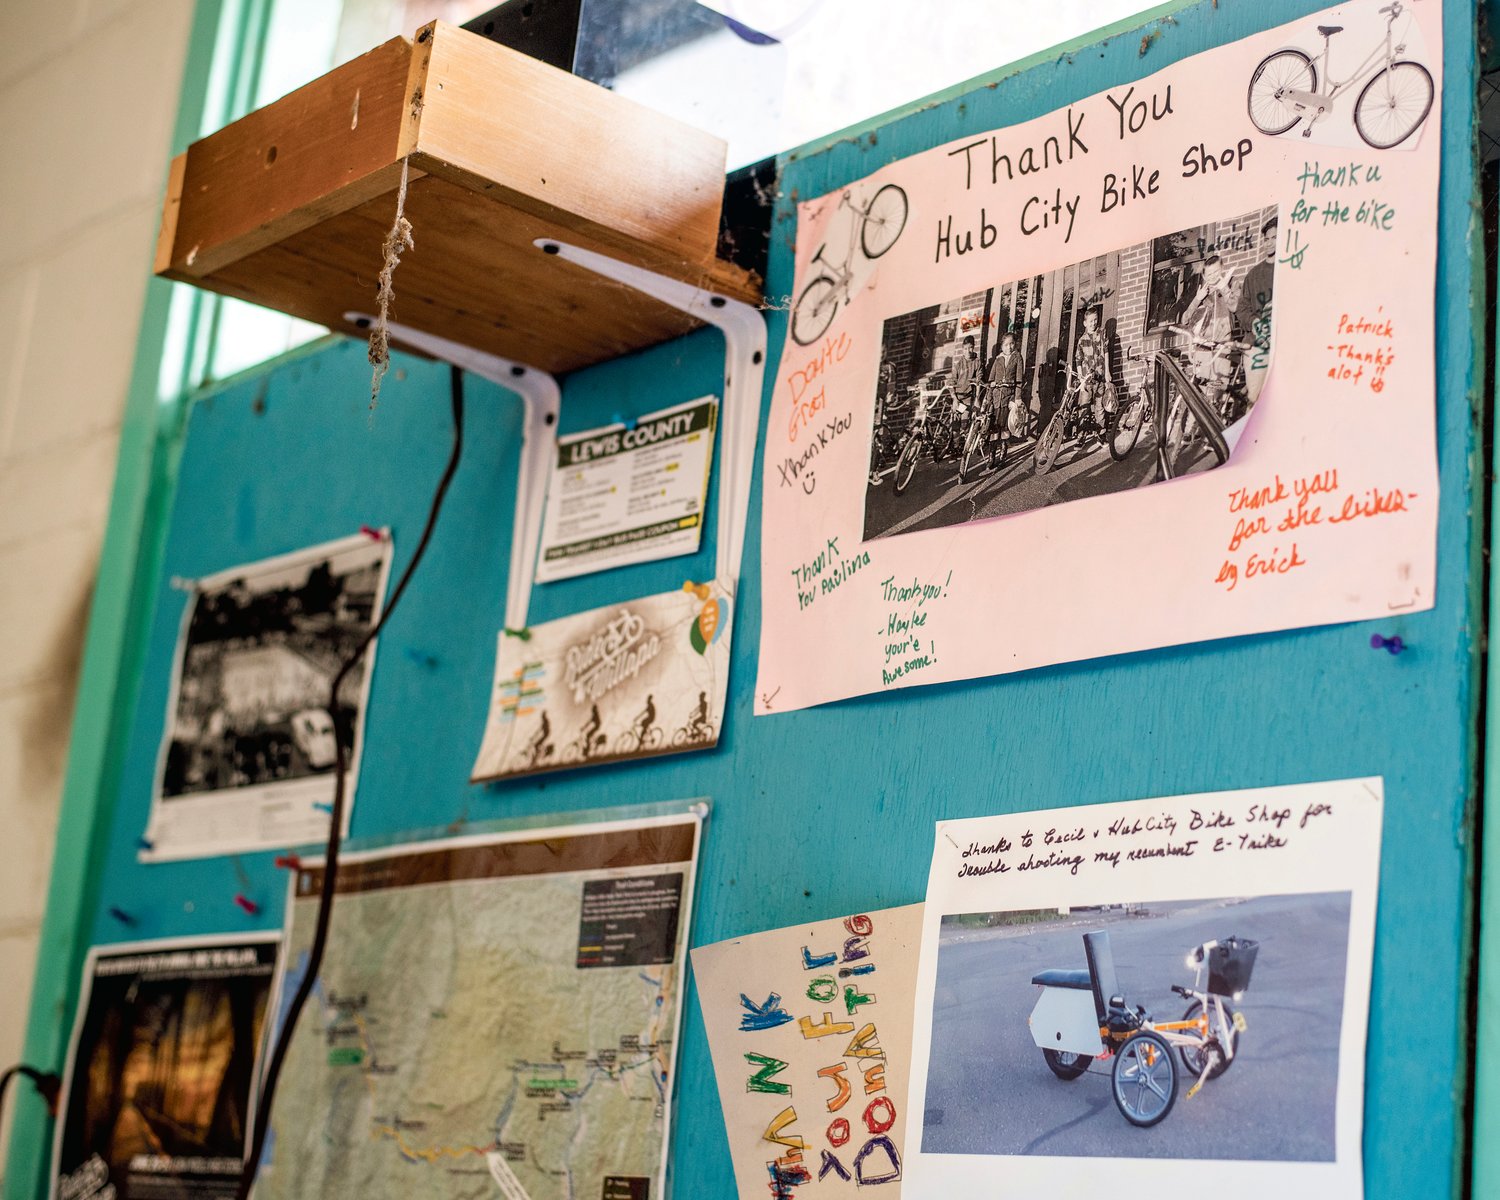 Photos and thank you cards hang on display inside the Hub City Bike Shop in Centralia.